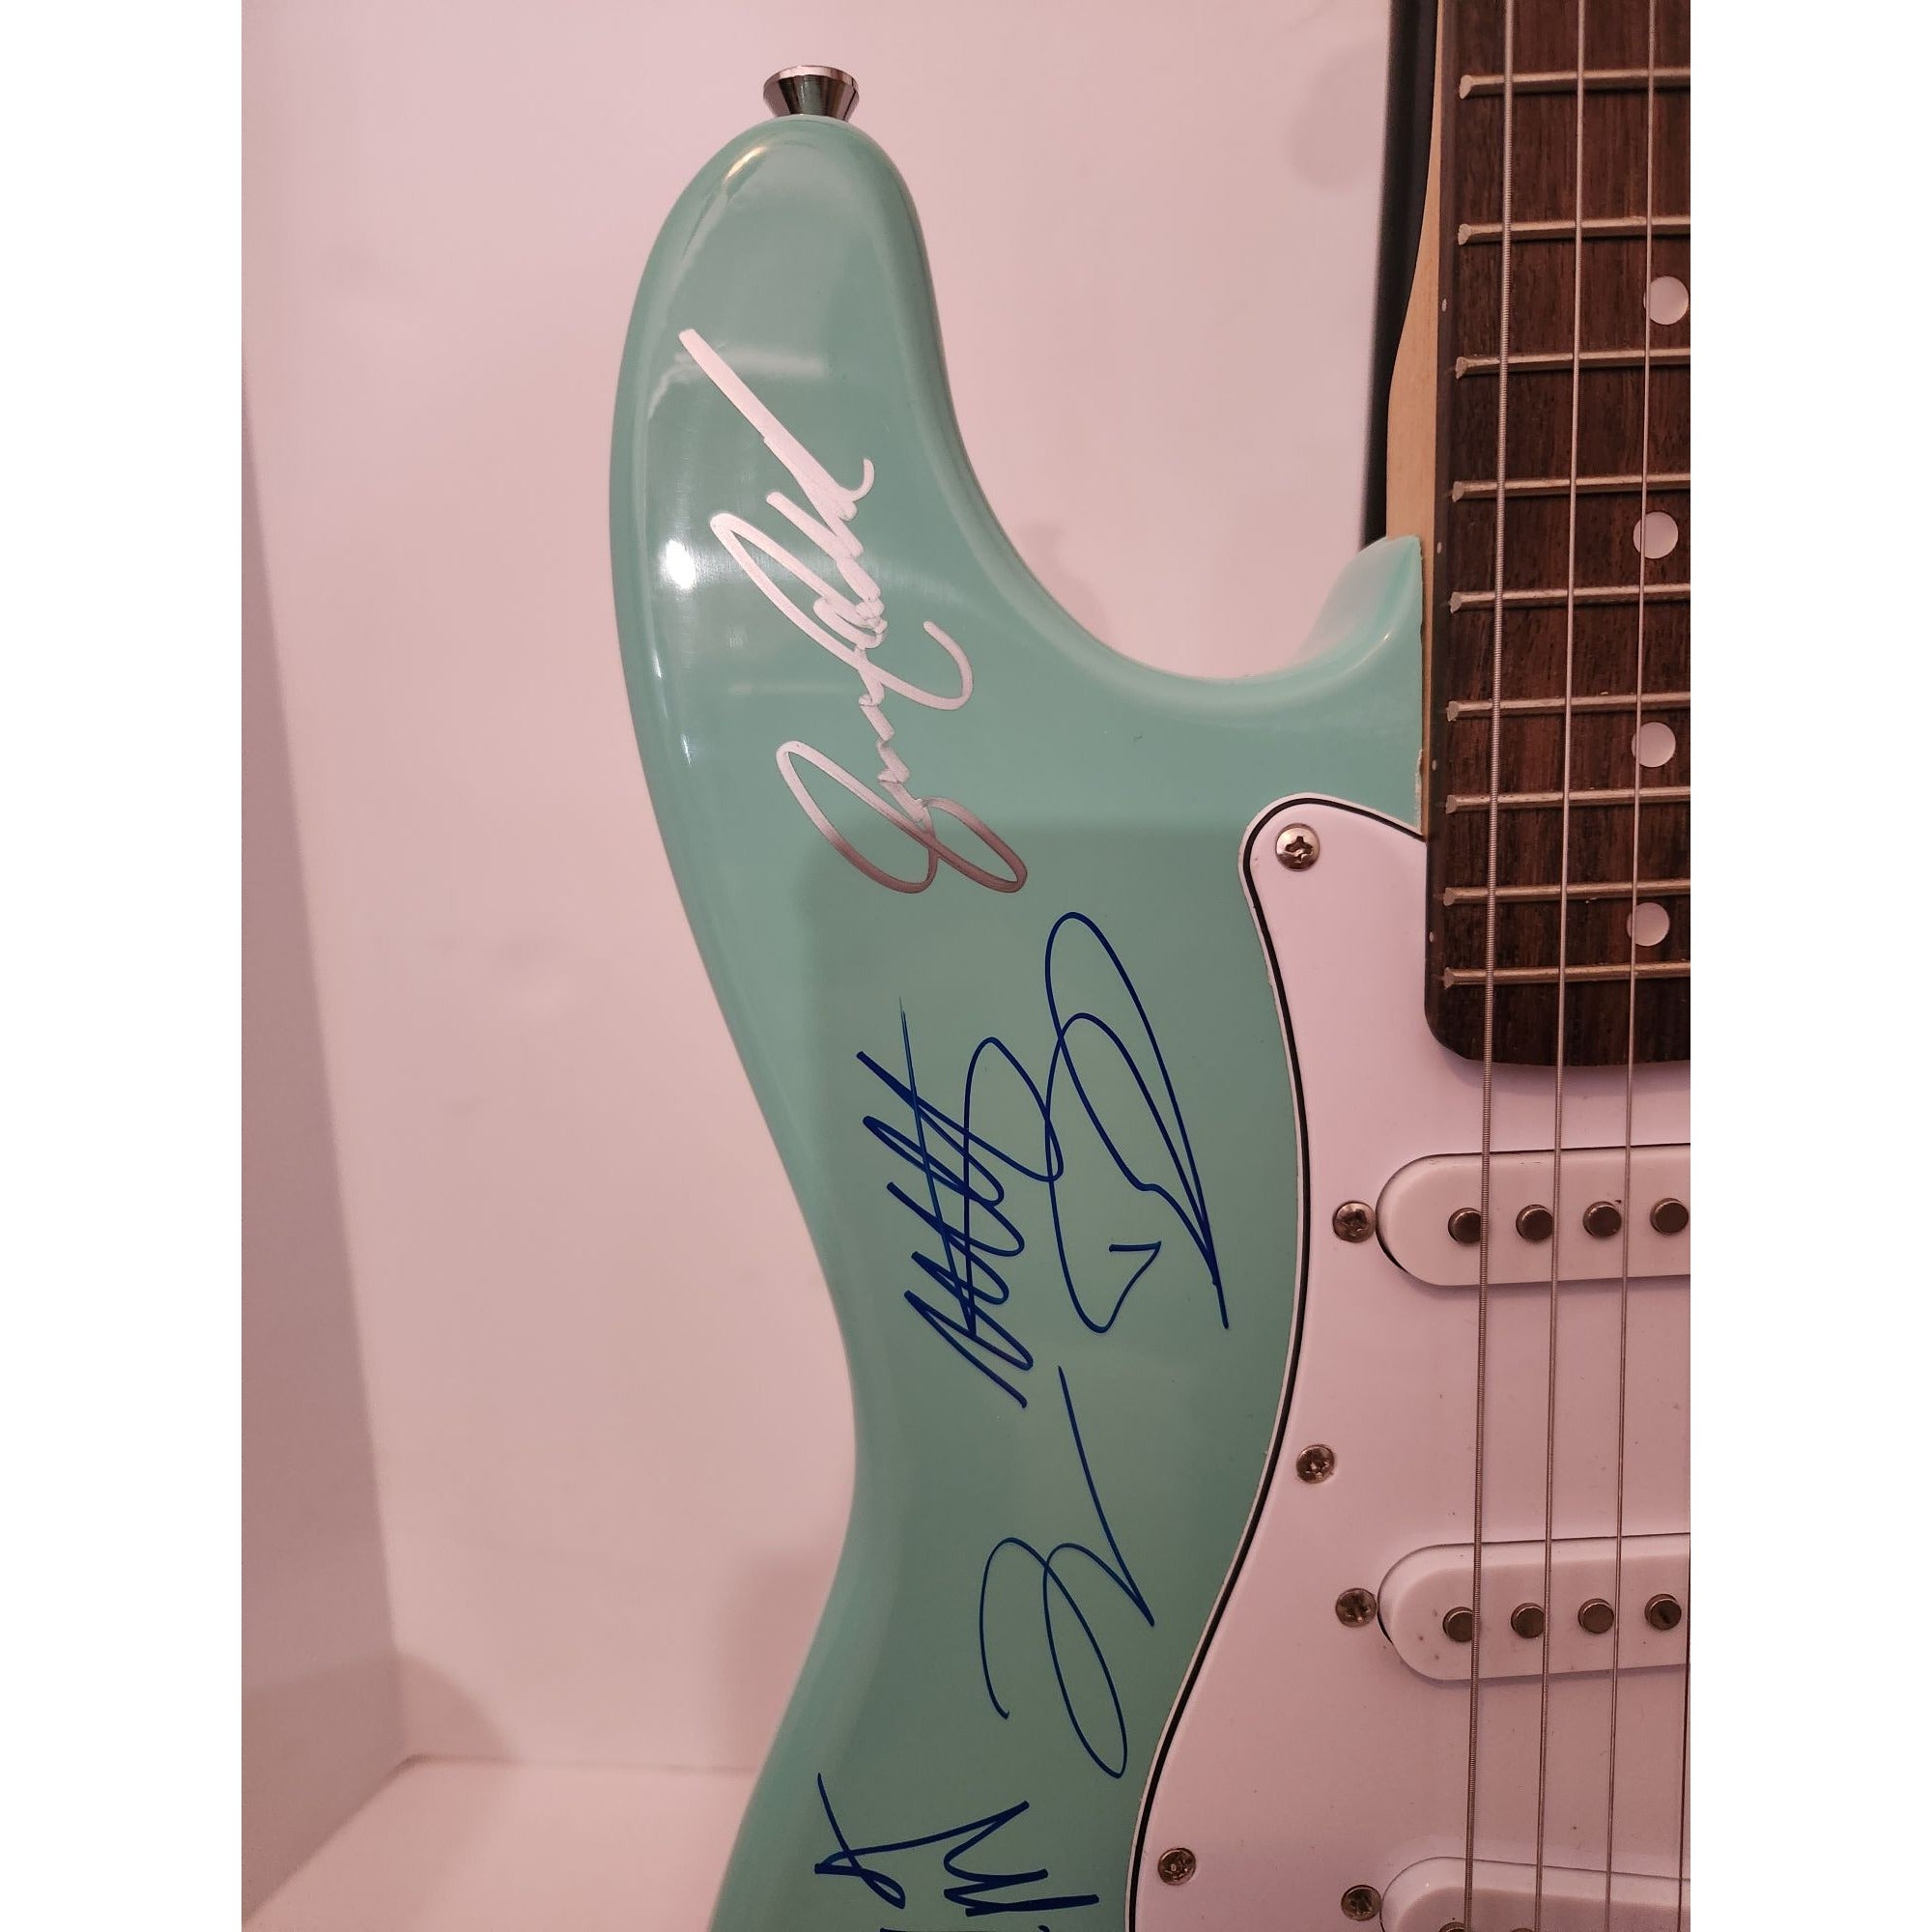 David Grohl, Billie Joe Armstrong, Chris Cornell, Jerry Cantrell signed guitar with proof